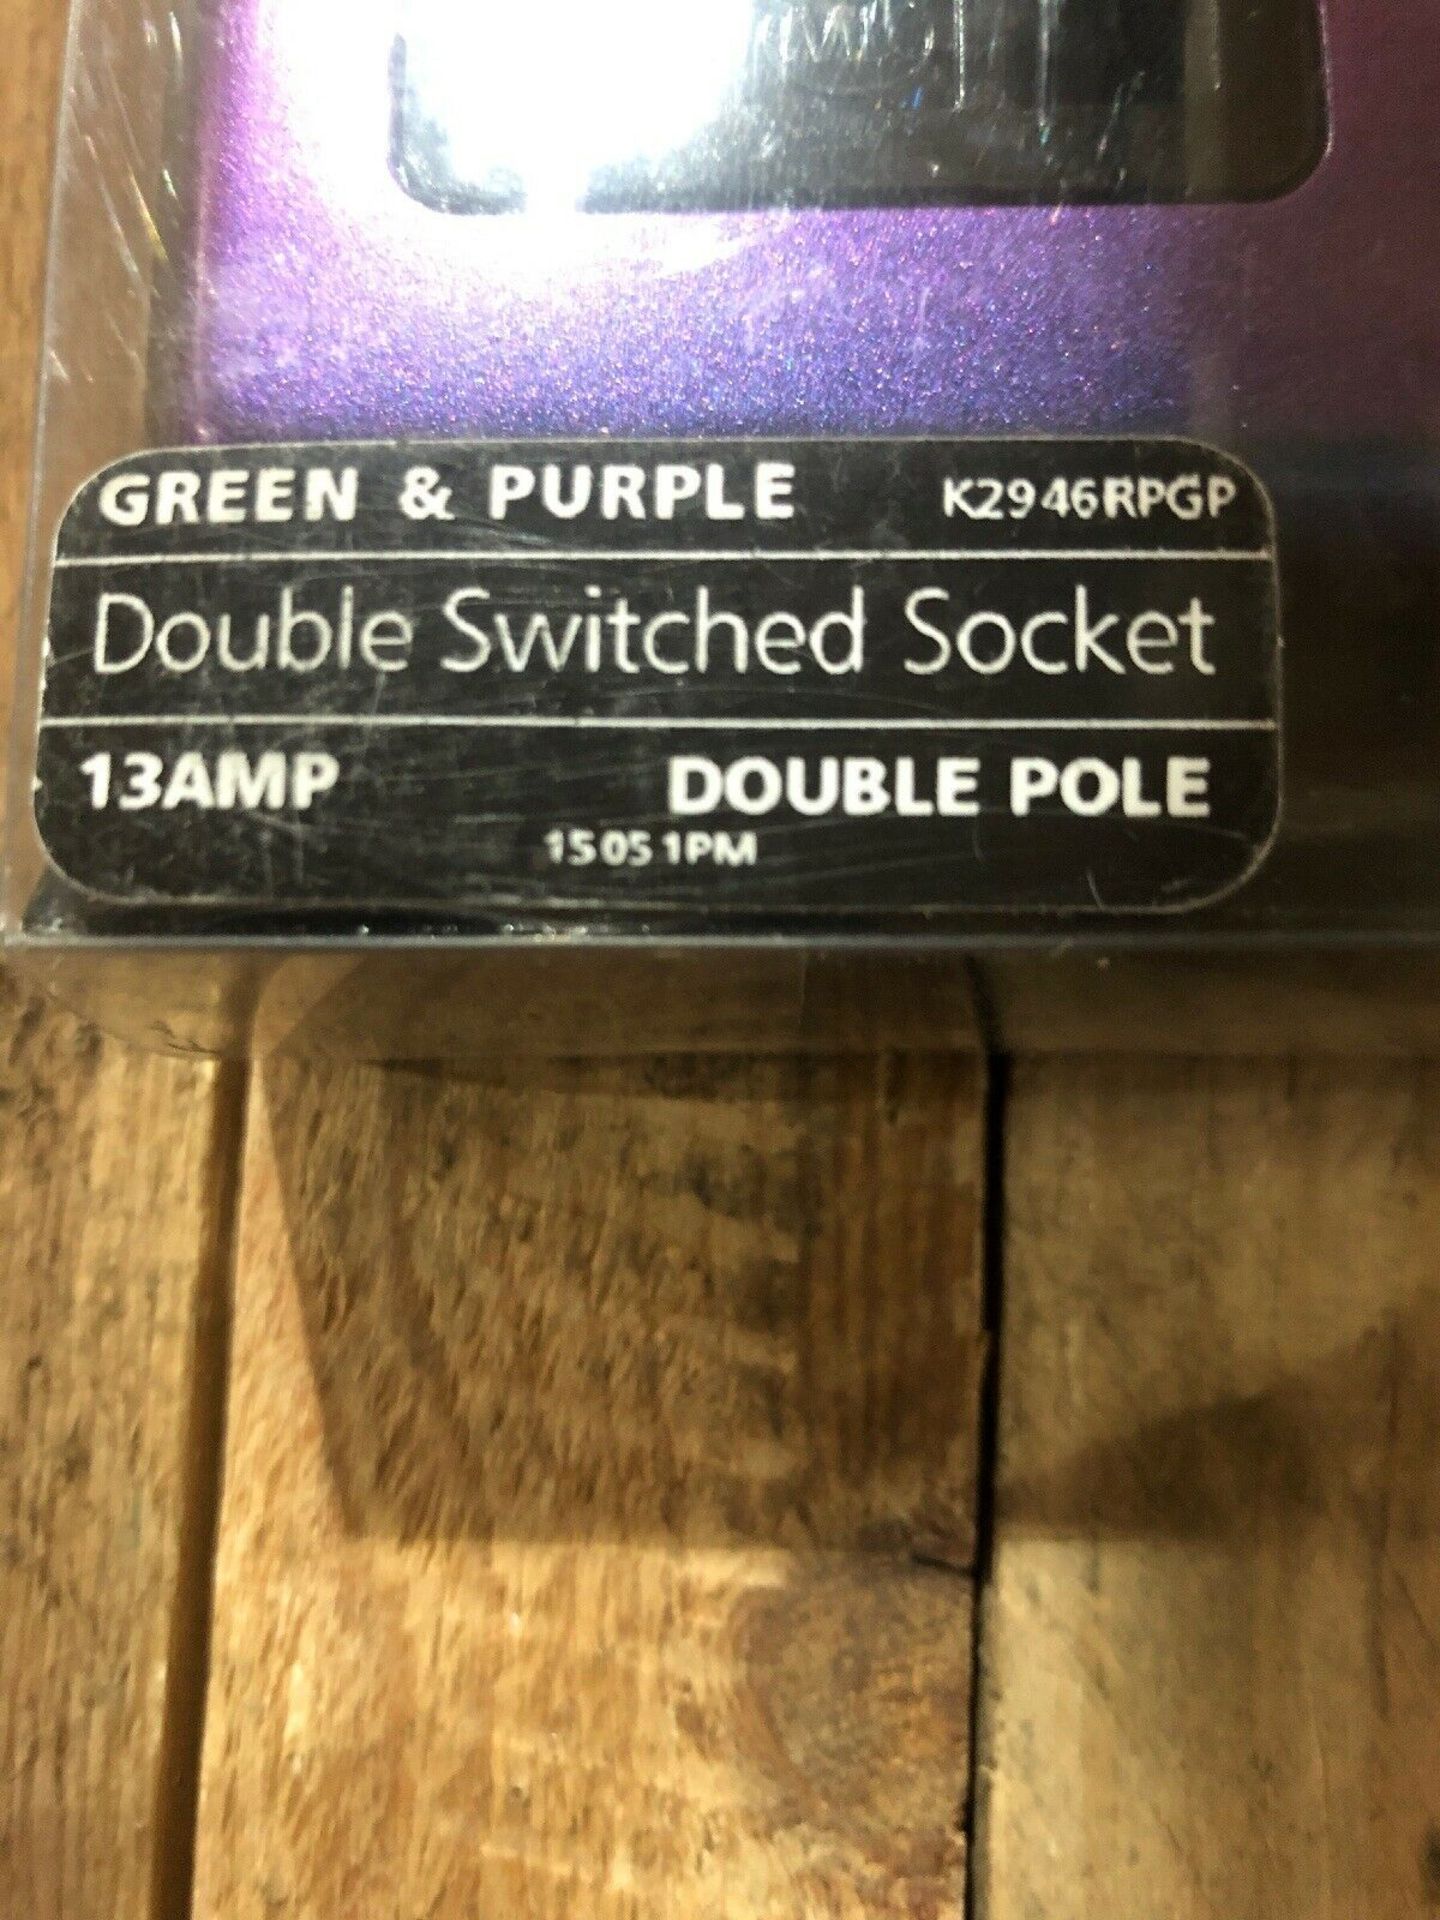 MK Contrast 13amp Green and Purple Double Dwitched Socket - Image 2 of 5